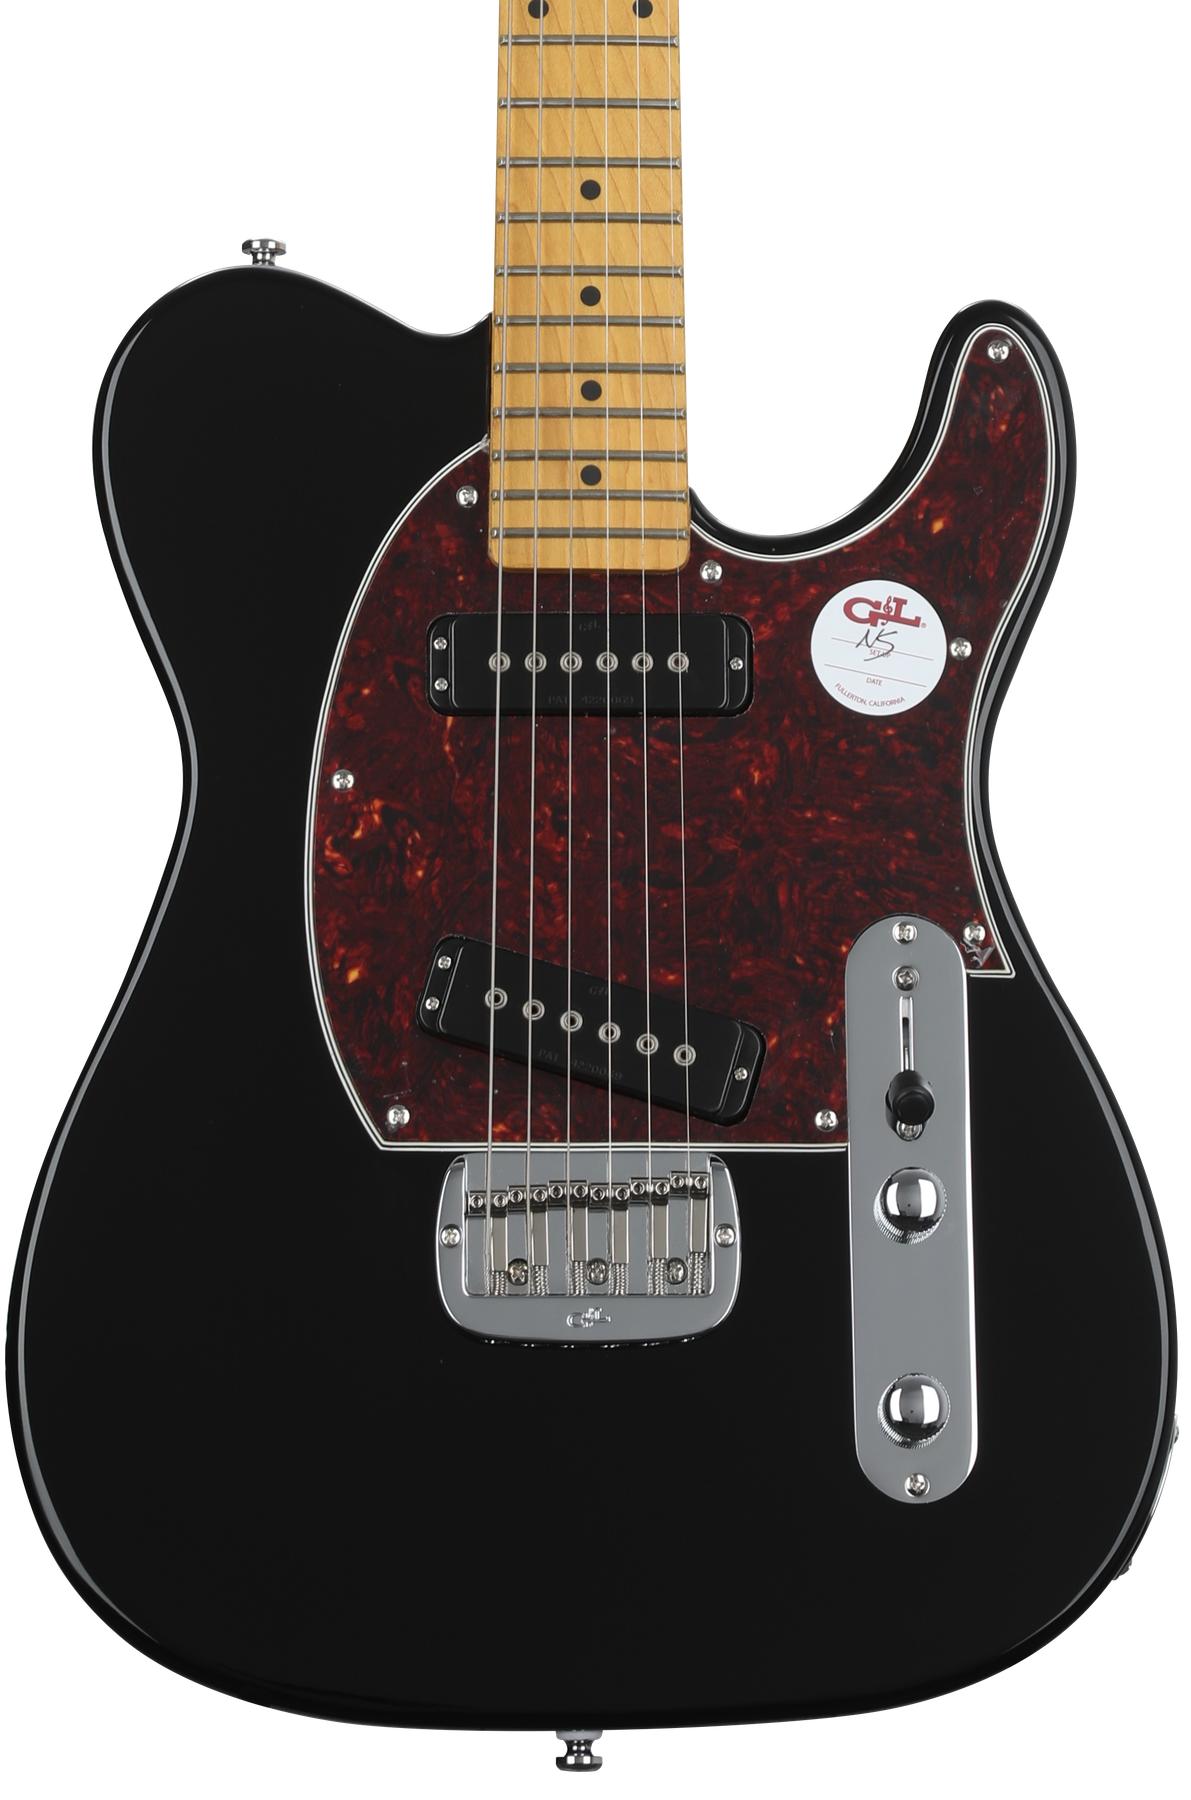 Ｇ&Ｌ USA ASAT SPECIAL by leofender - エレキギター